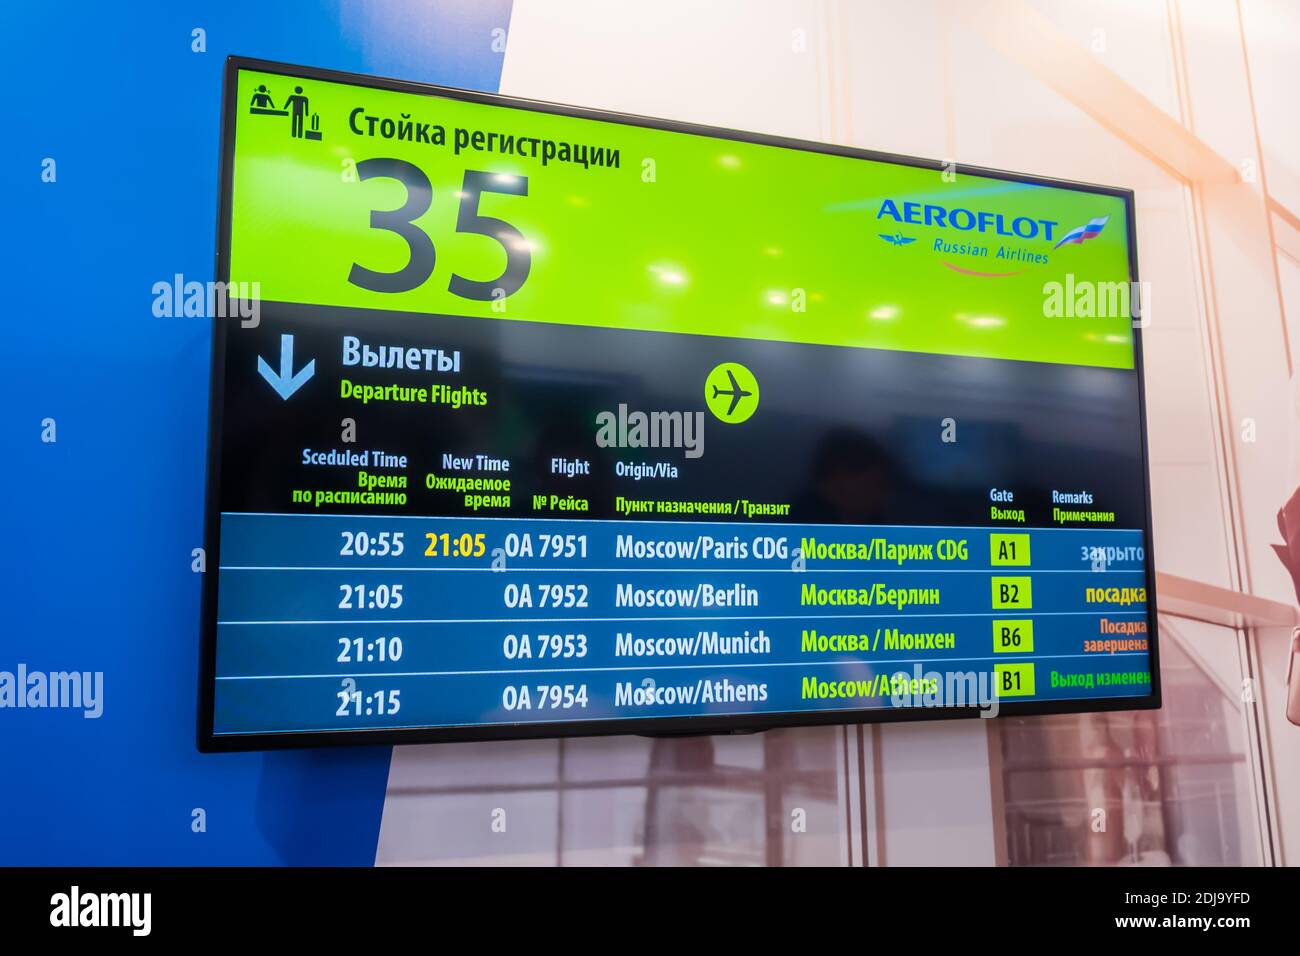 Airport departure board display on wall at air transport exhibition Stock Photo